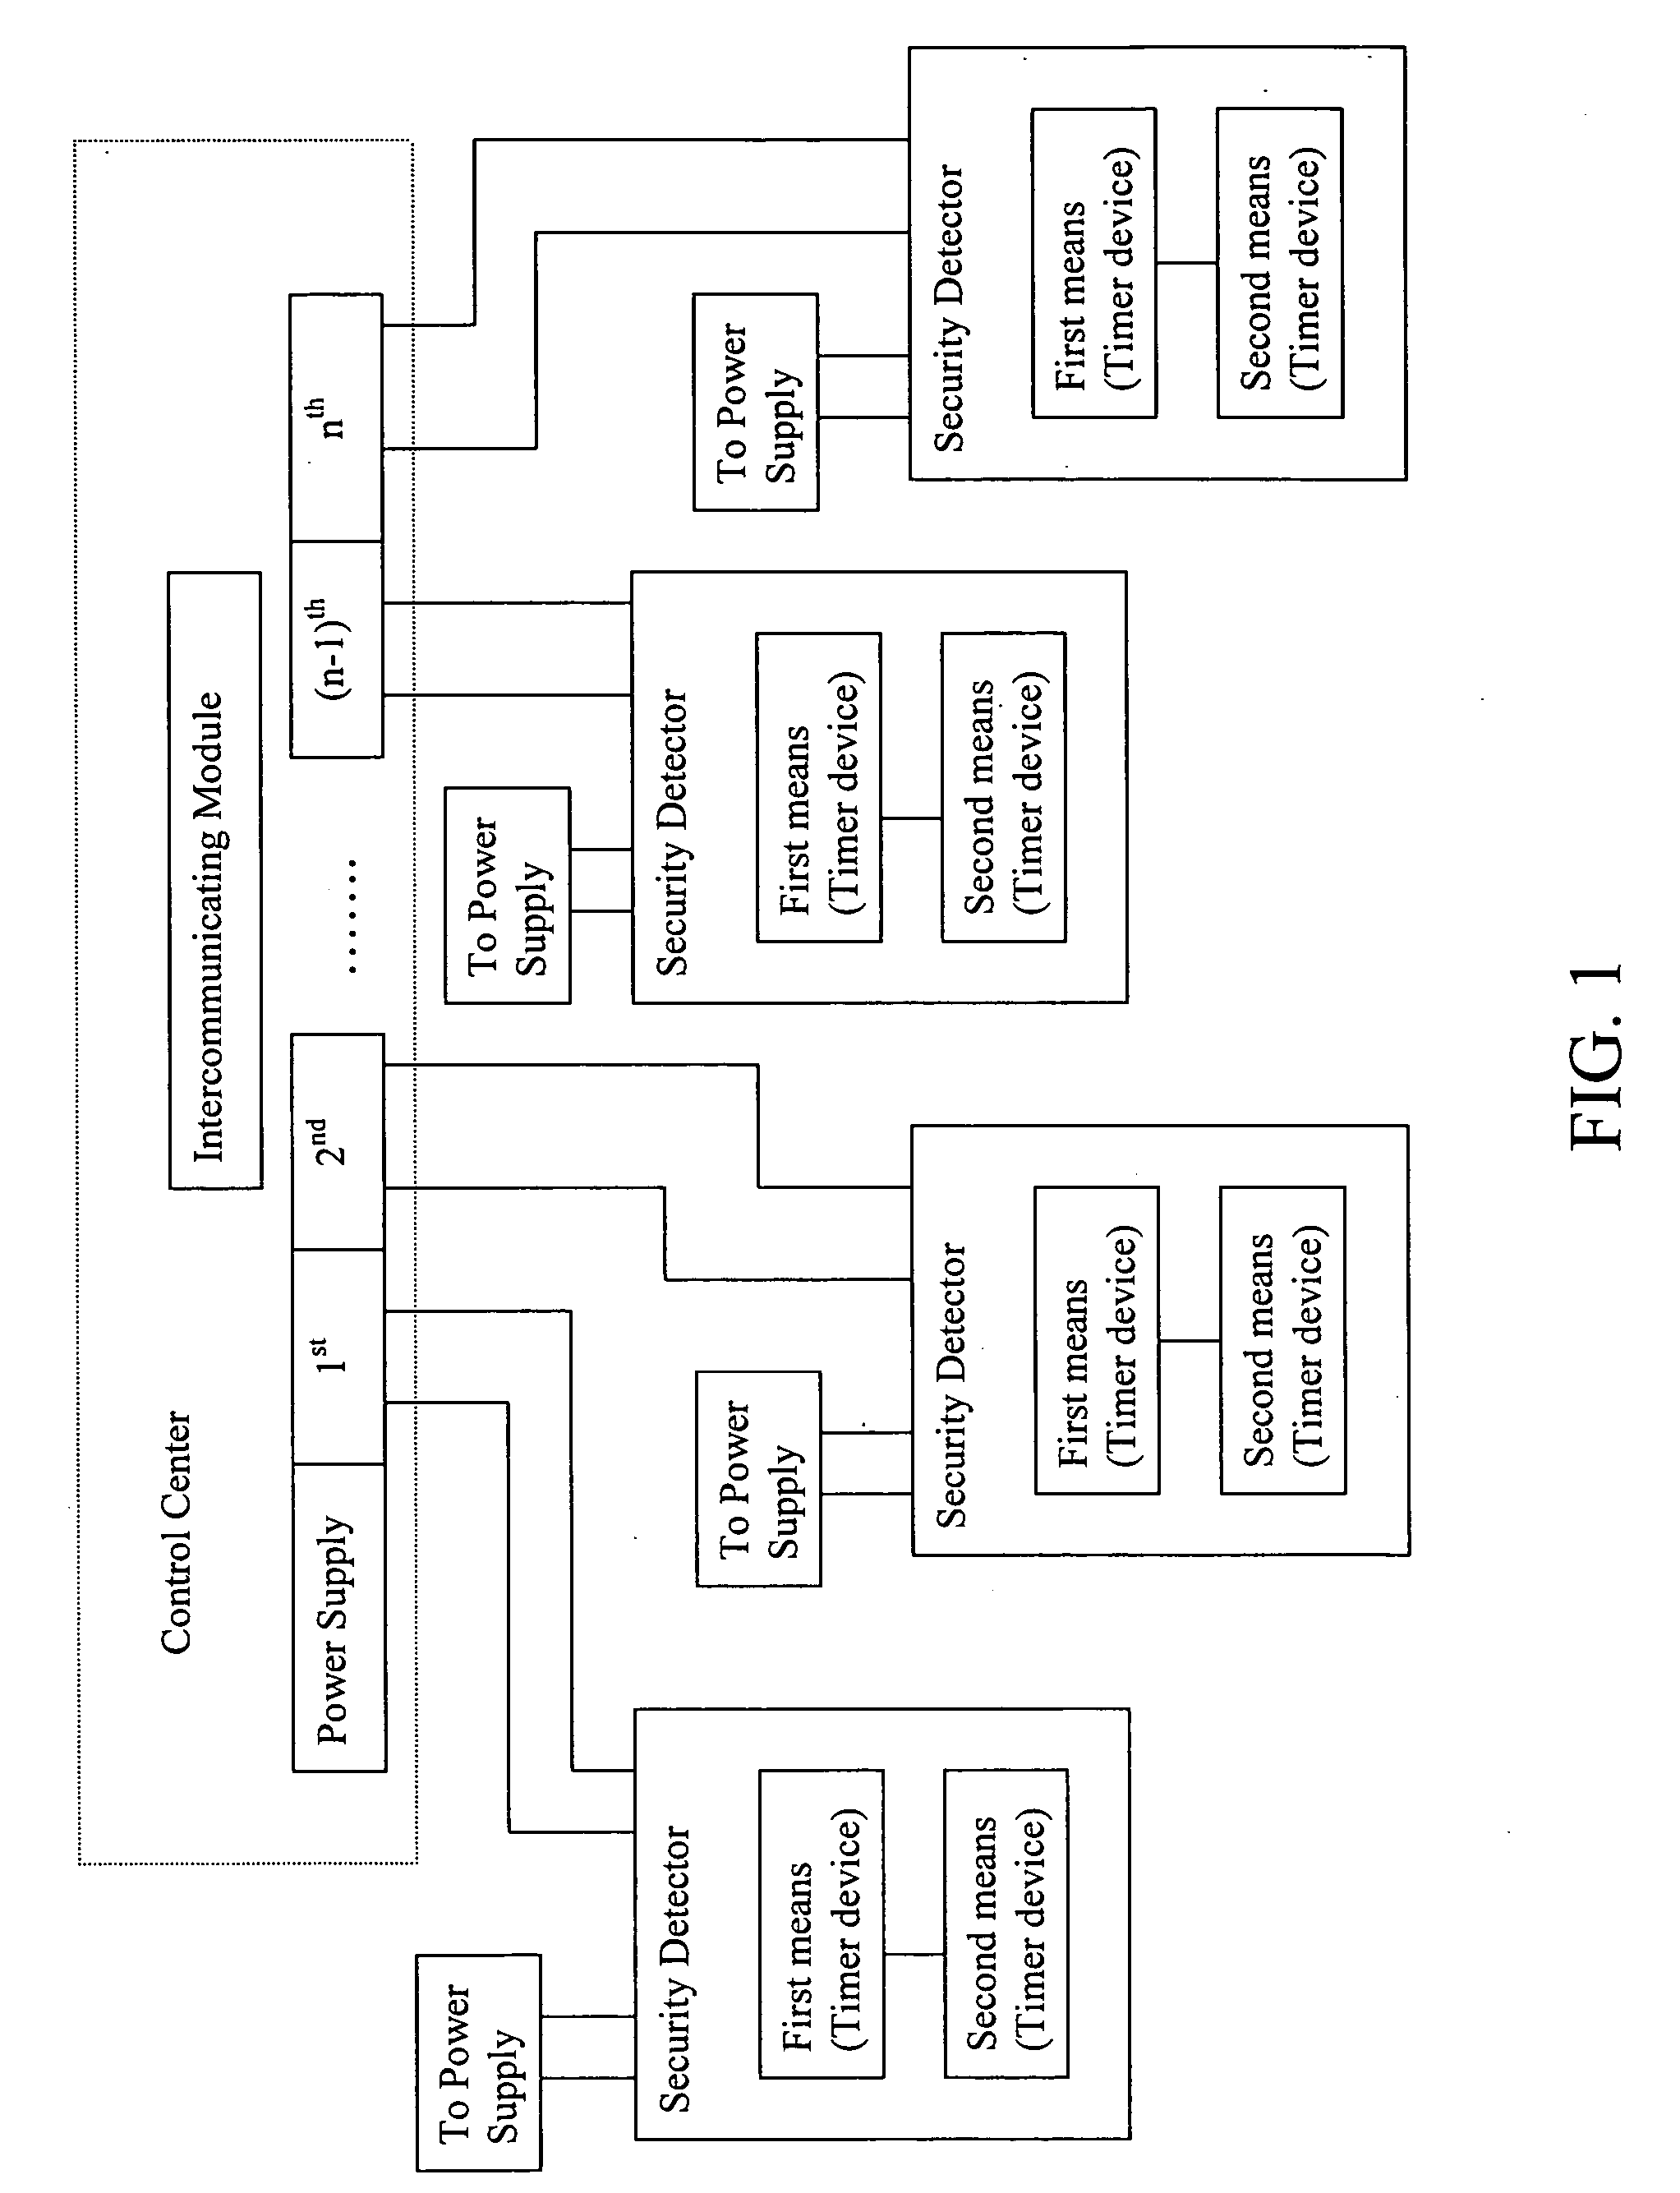 Security device with built-in intercommunicated false alarm reduction control